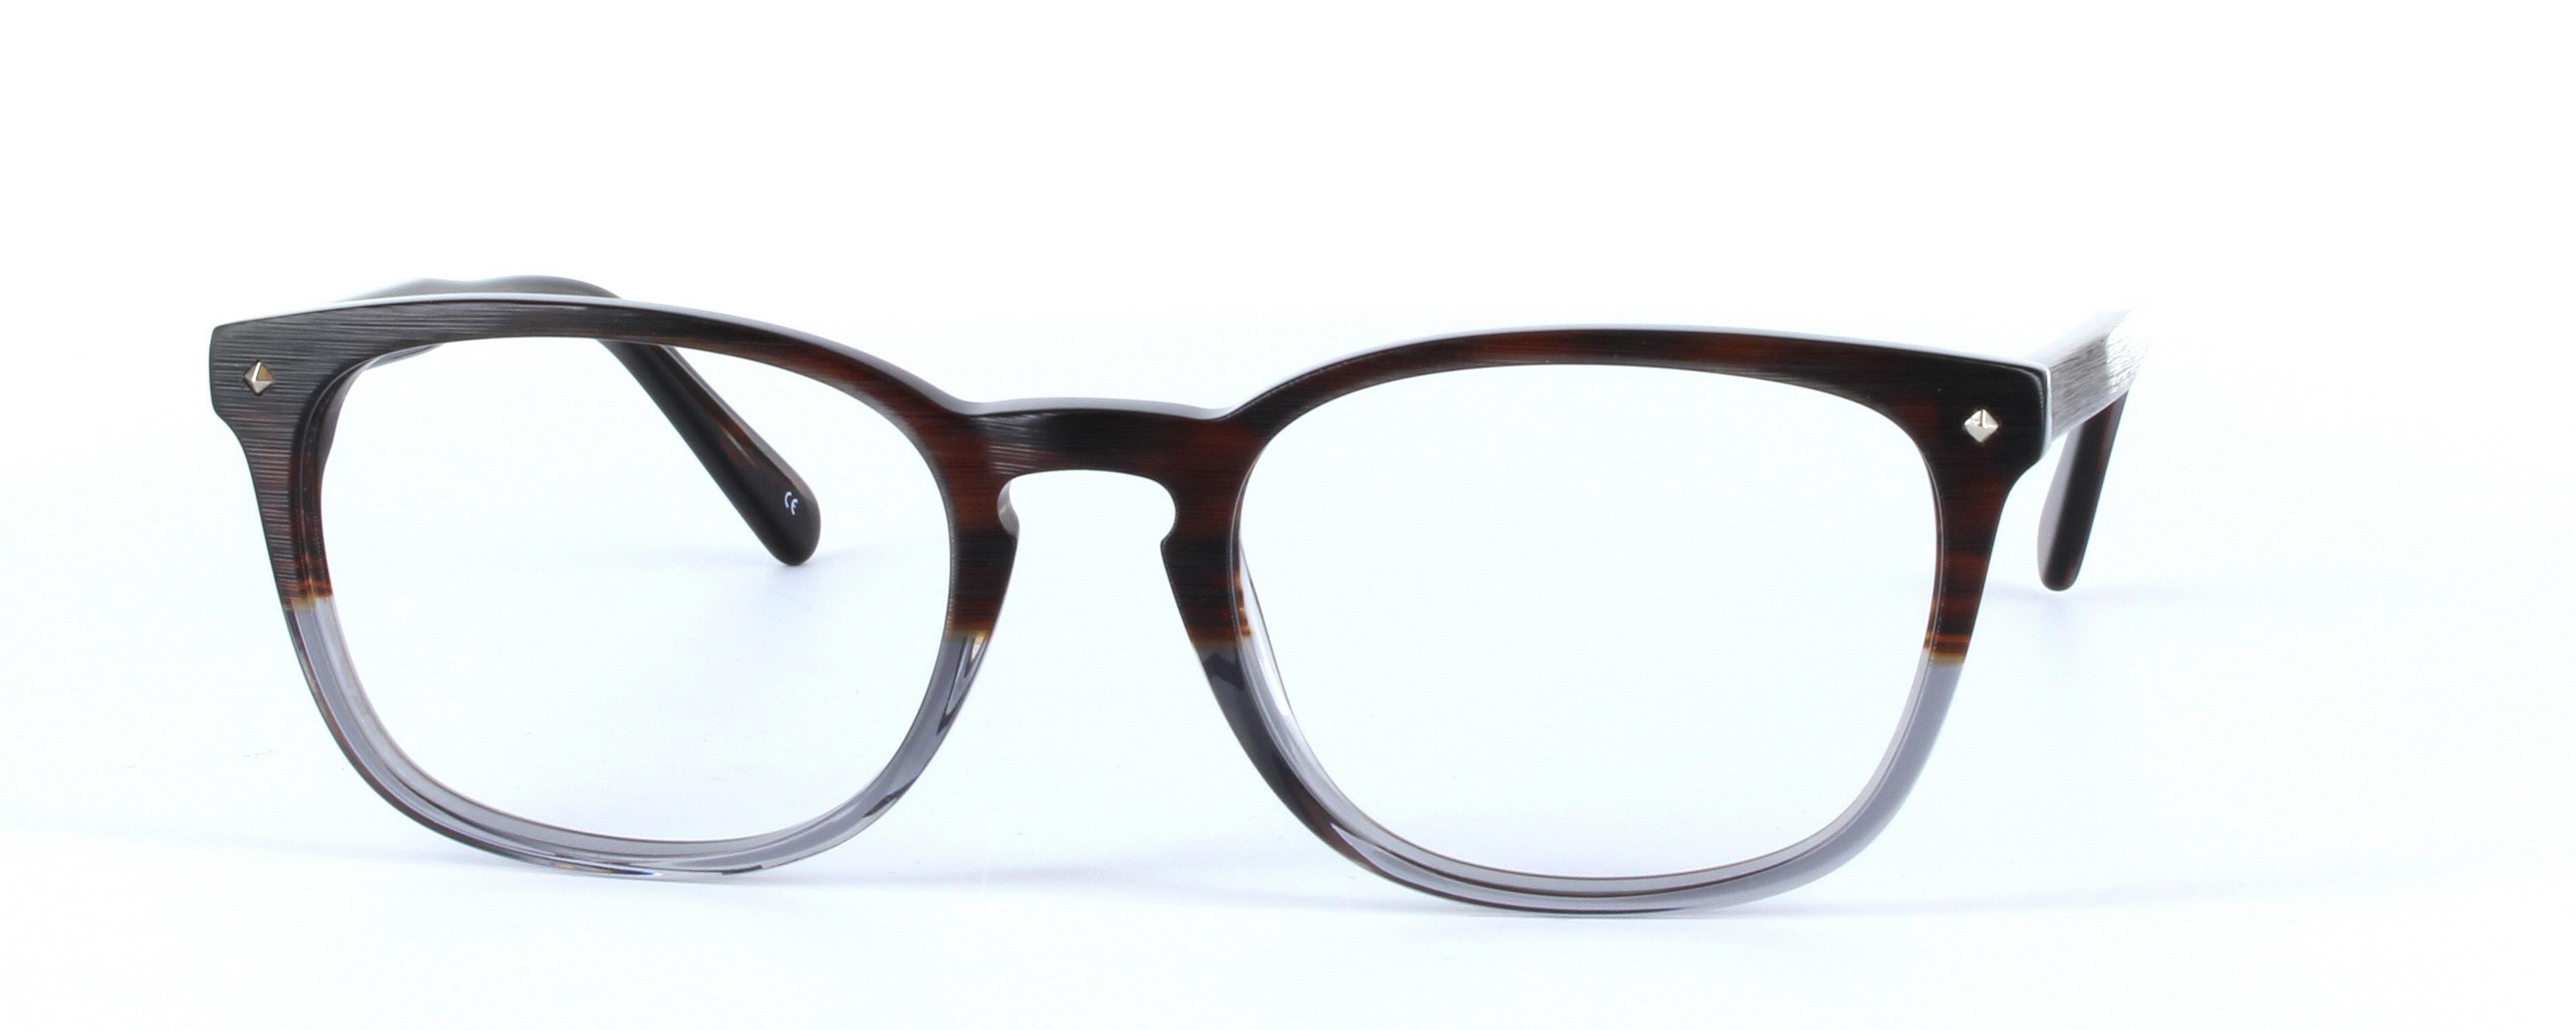 Comet Brown and Grey Full Rim Oval Plastic Glasses - Image View 5